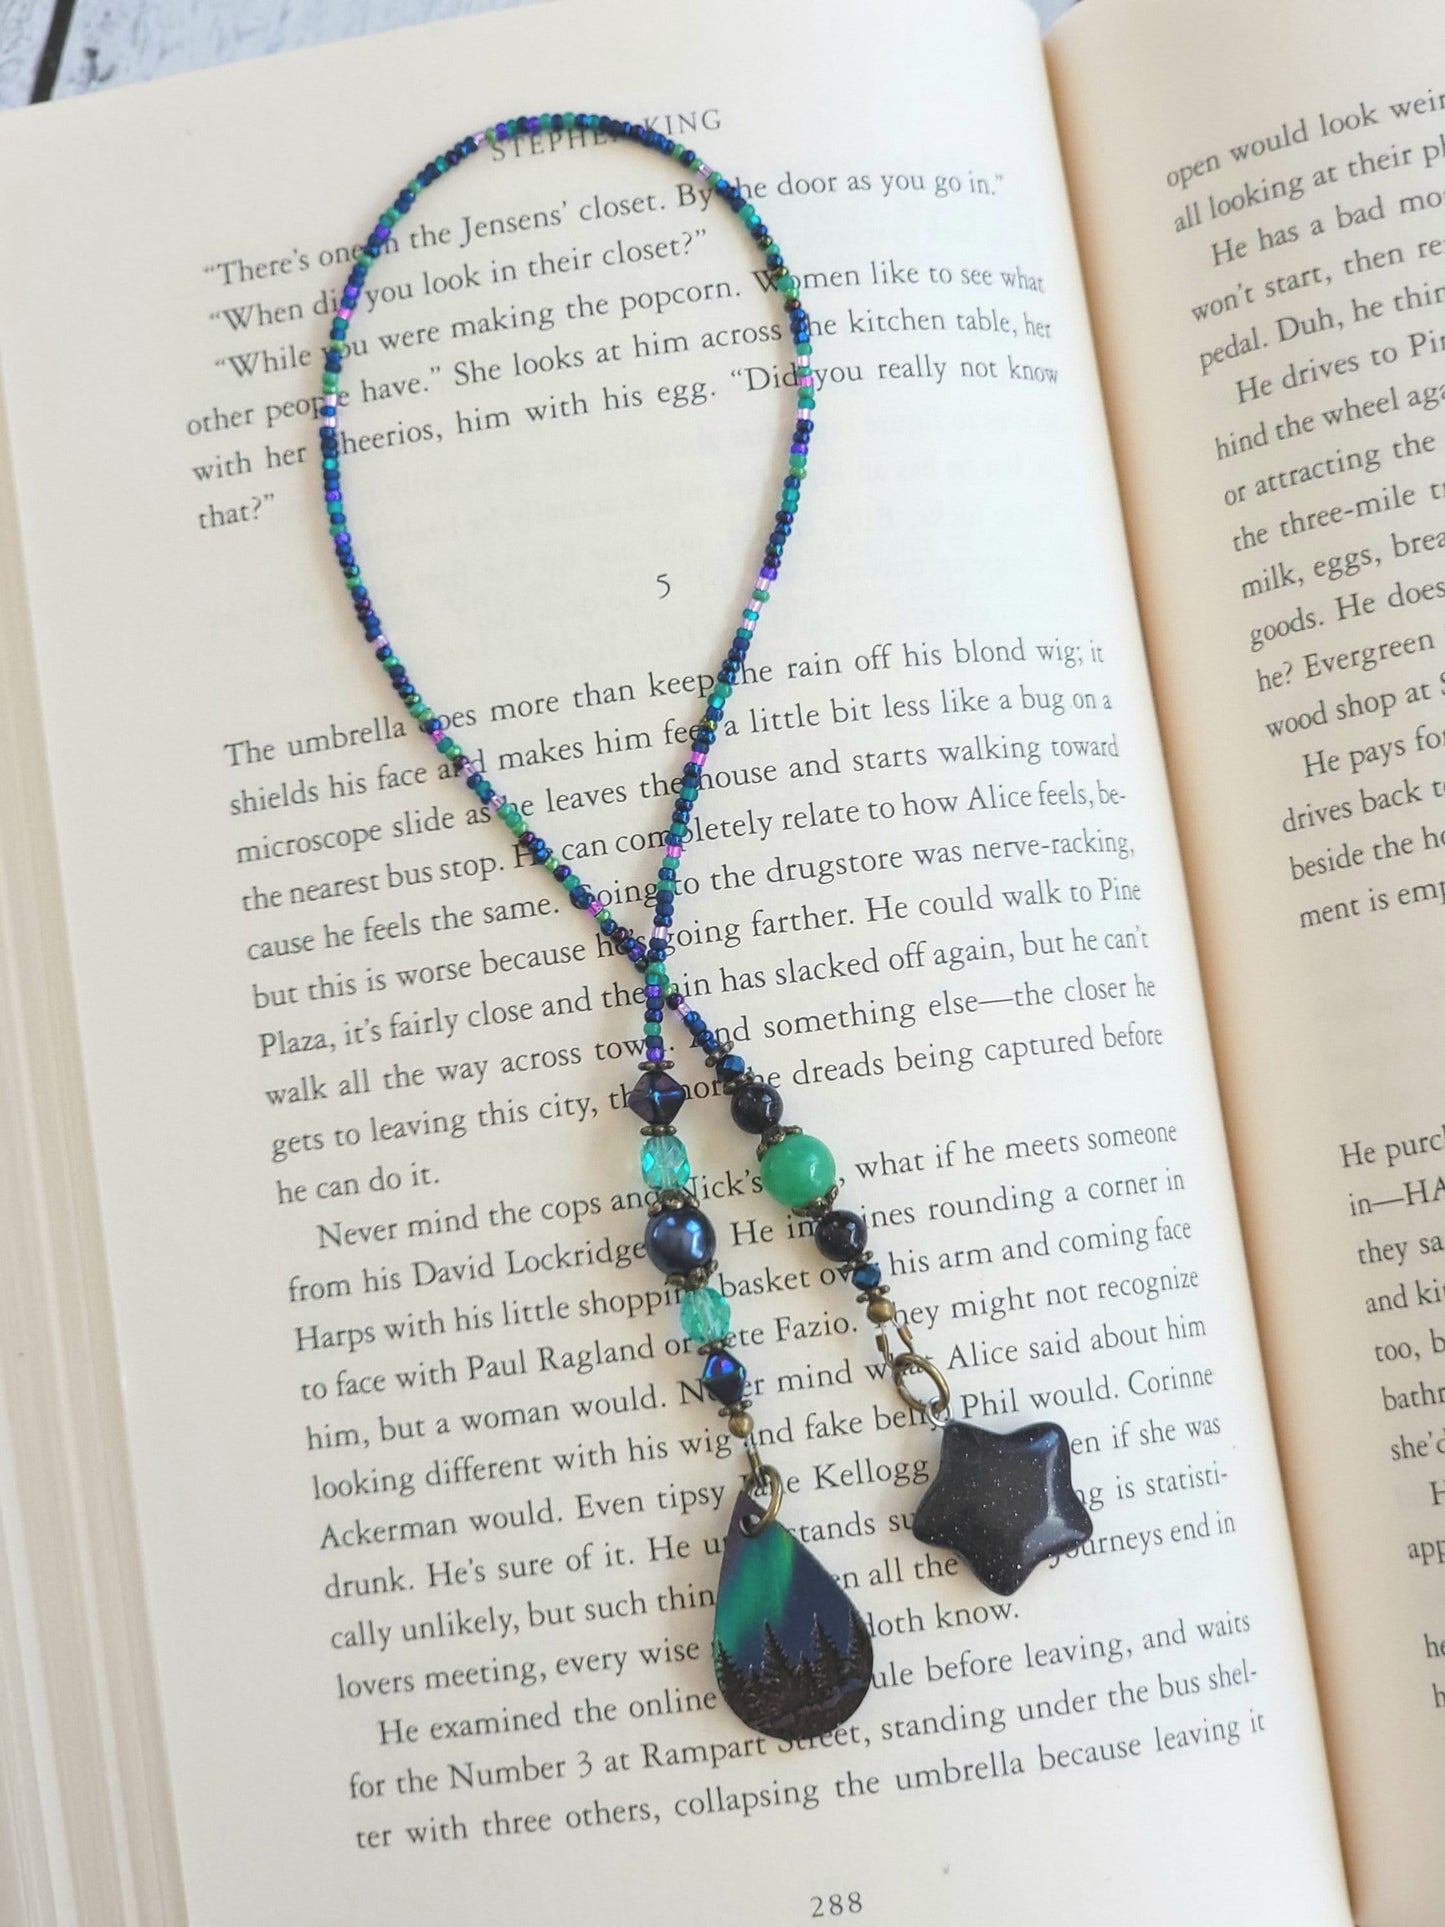 Add a Touch of Northern Lights to Your Book with this Beaded Bookmark and Aurora Borealis Pendant